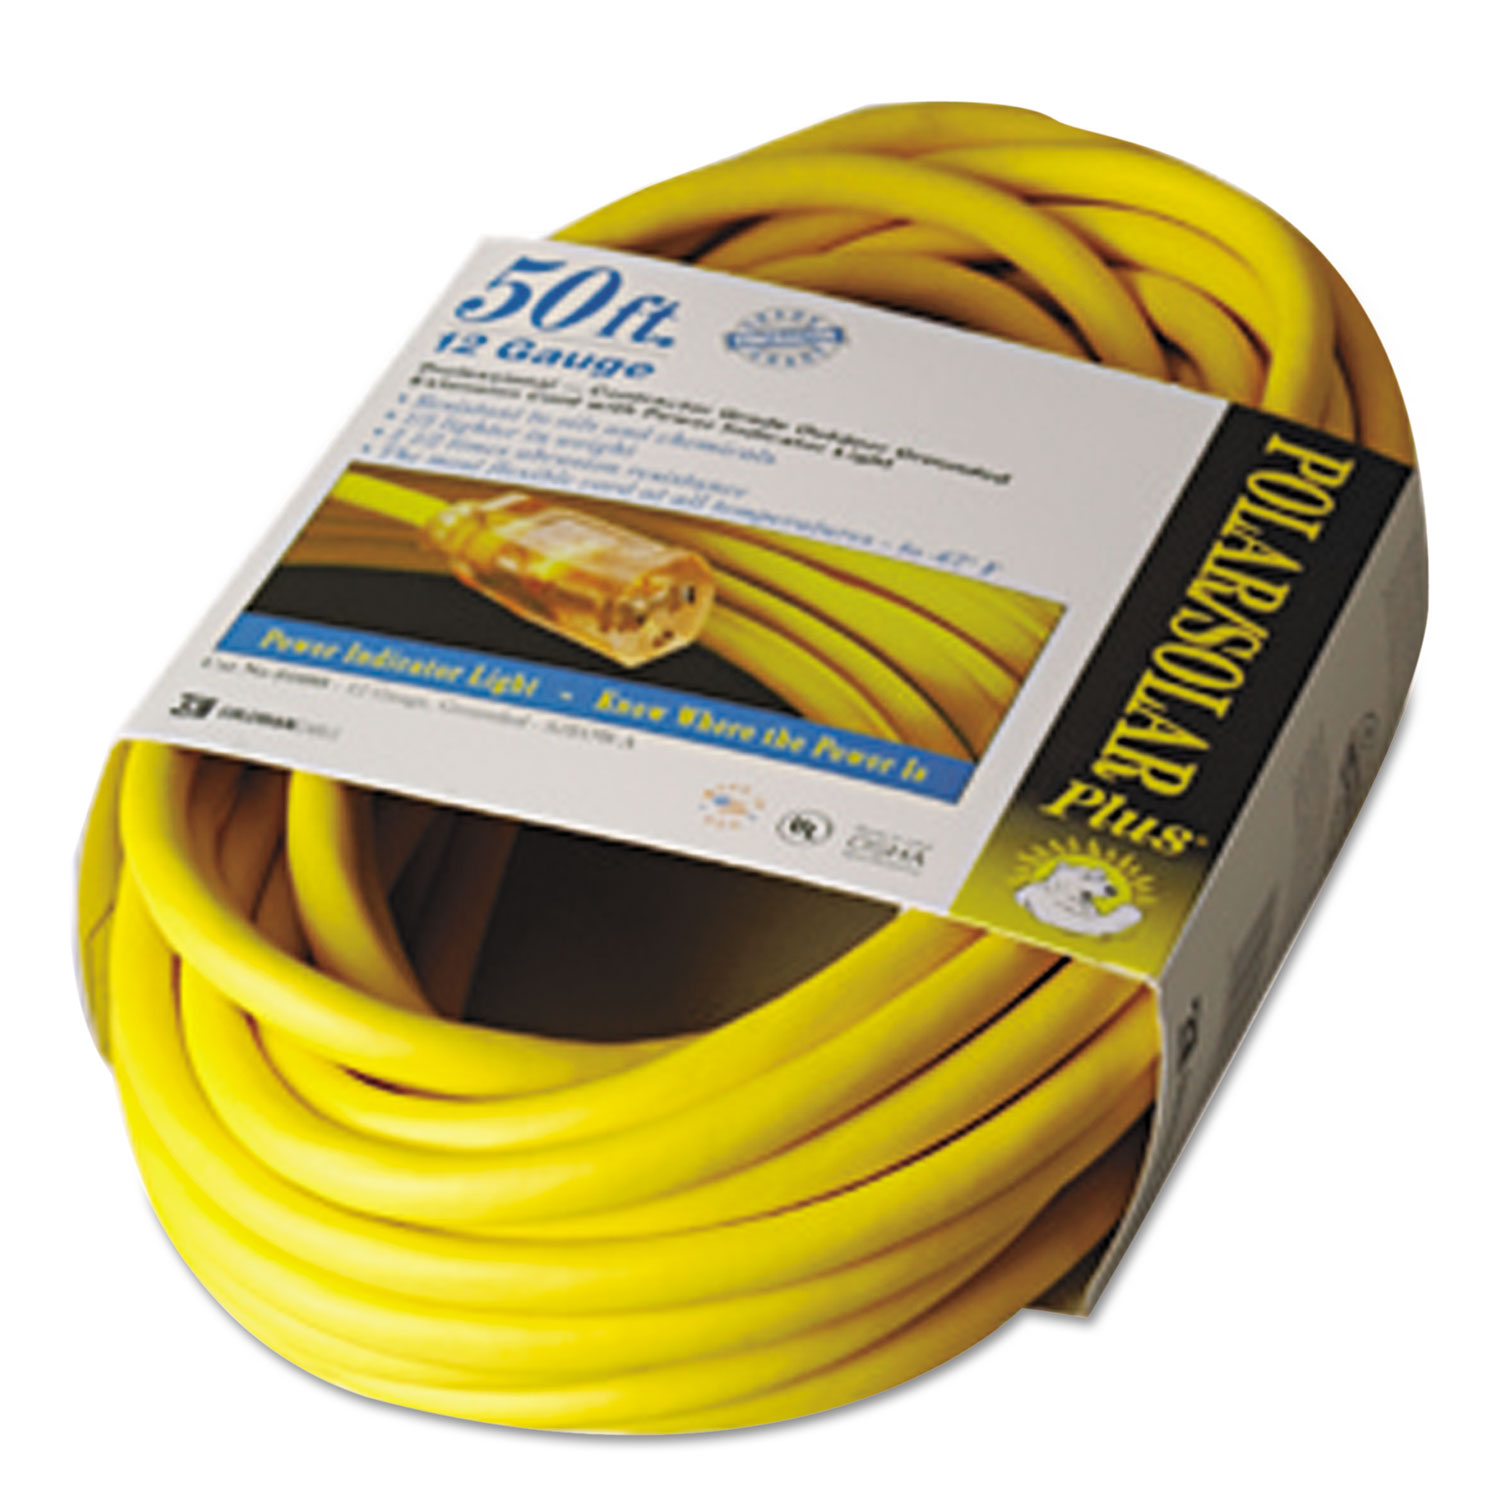  CCI 016880002 Polar/Solar Indoor-Outdoor Extension Cord With Lighted End, 50ft, Yellow (COC01688) 